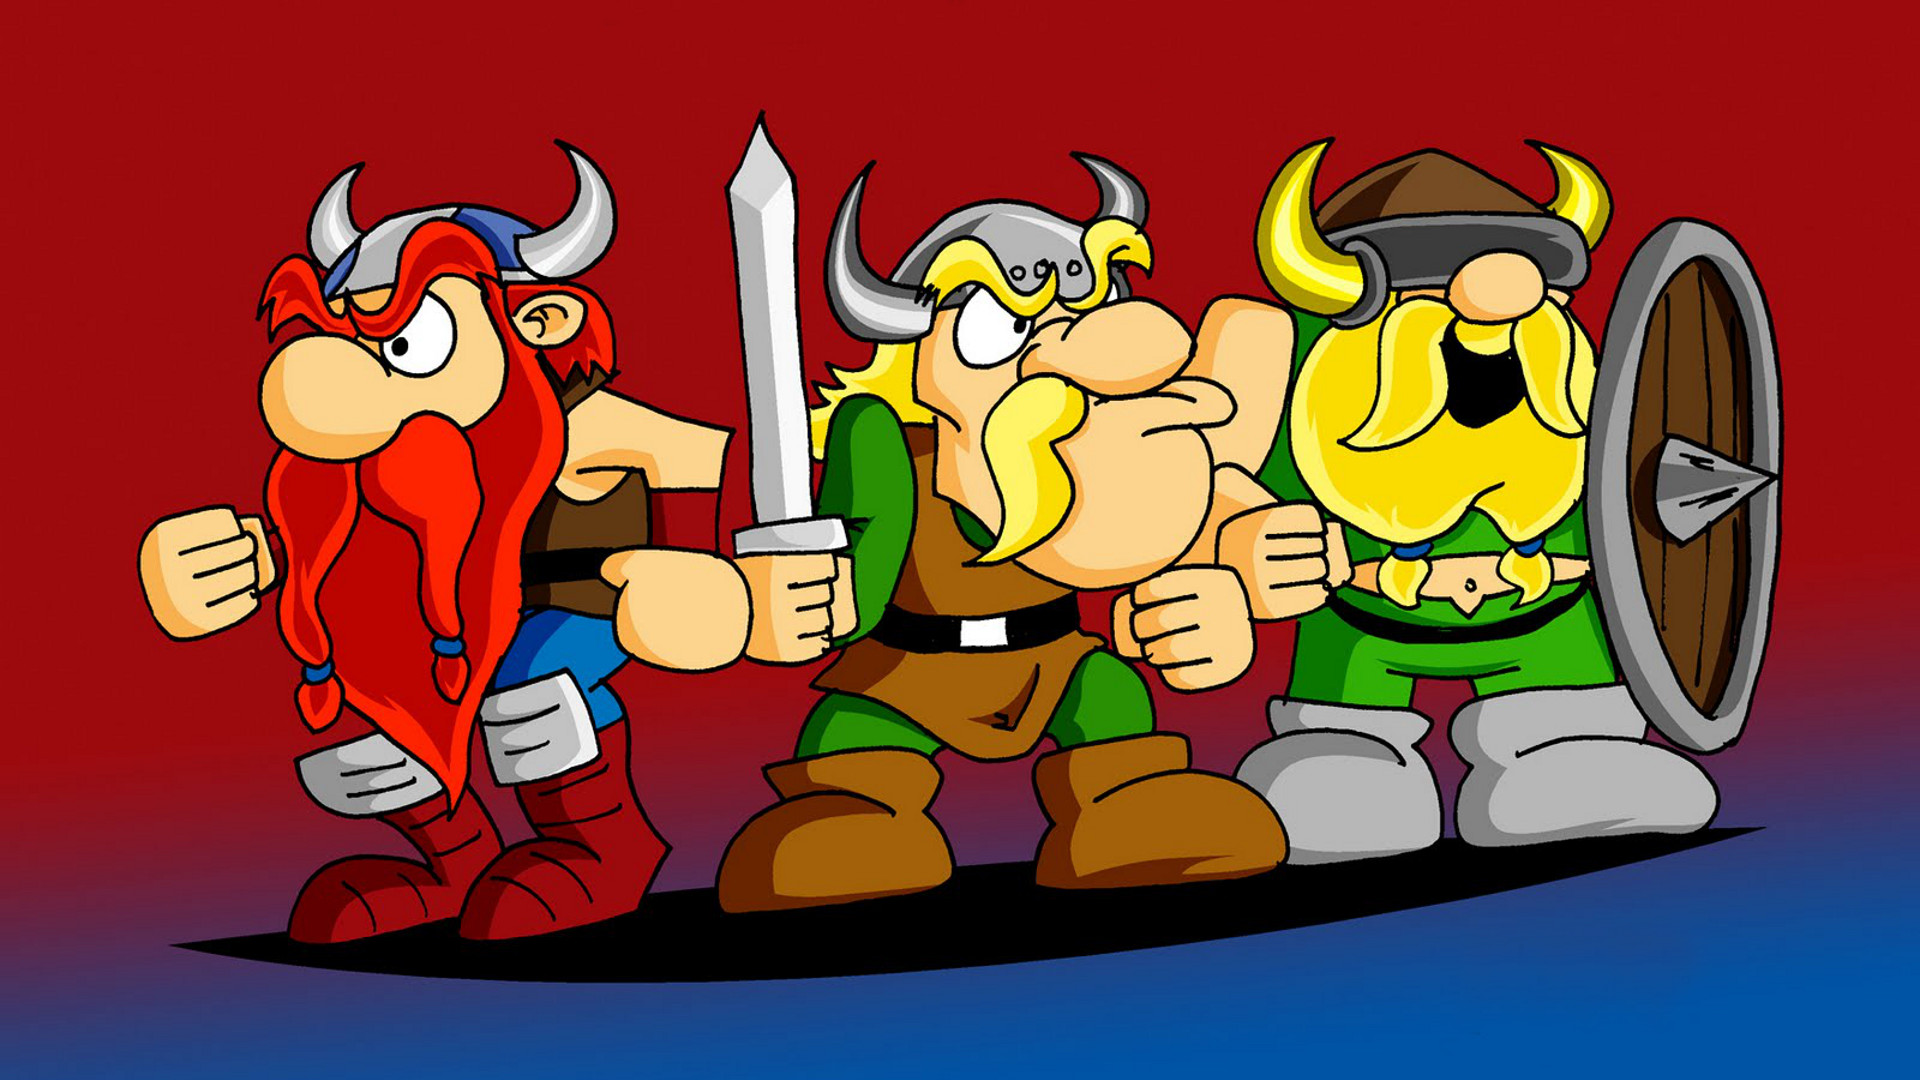 free download the lost vikings